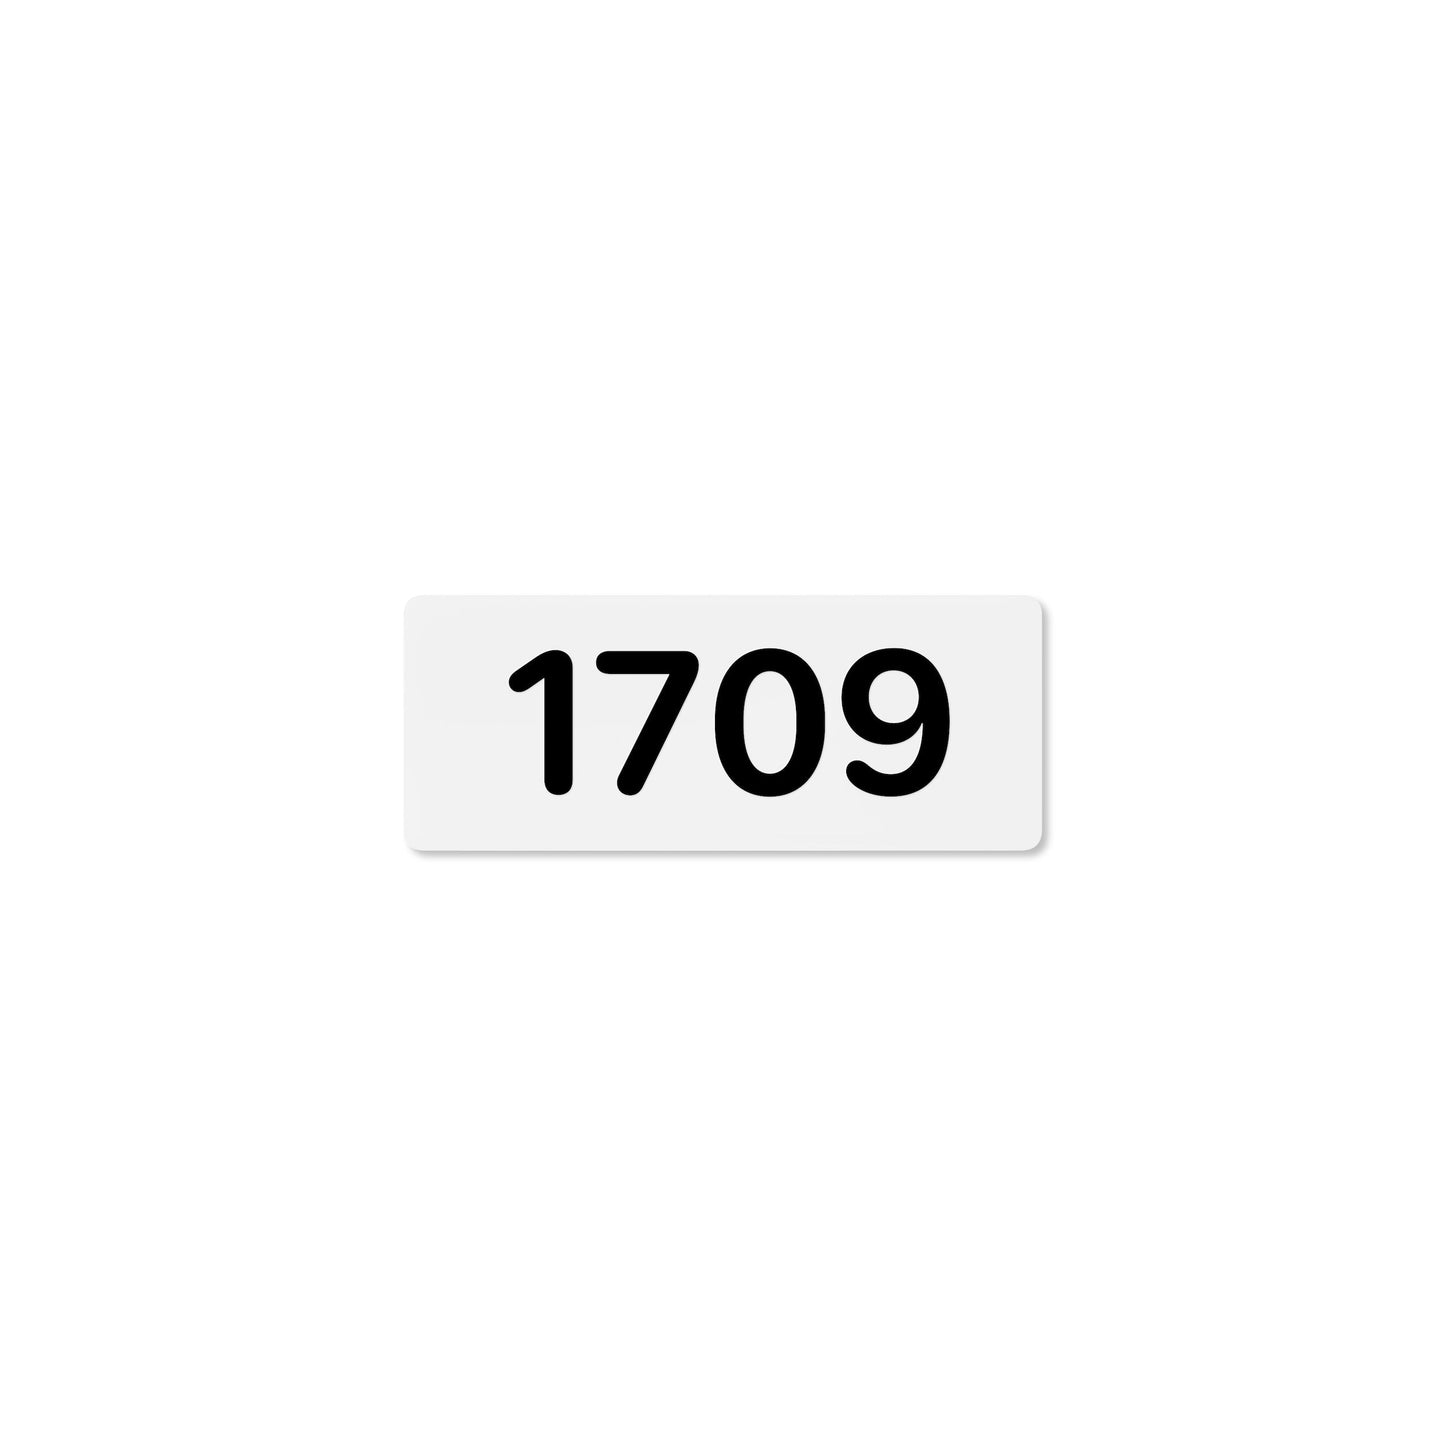 Numeral 1709